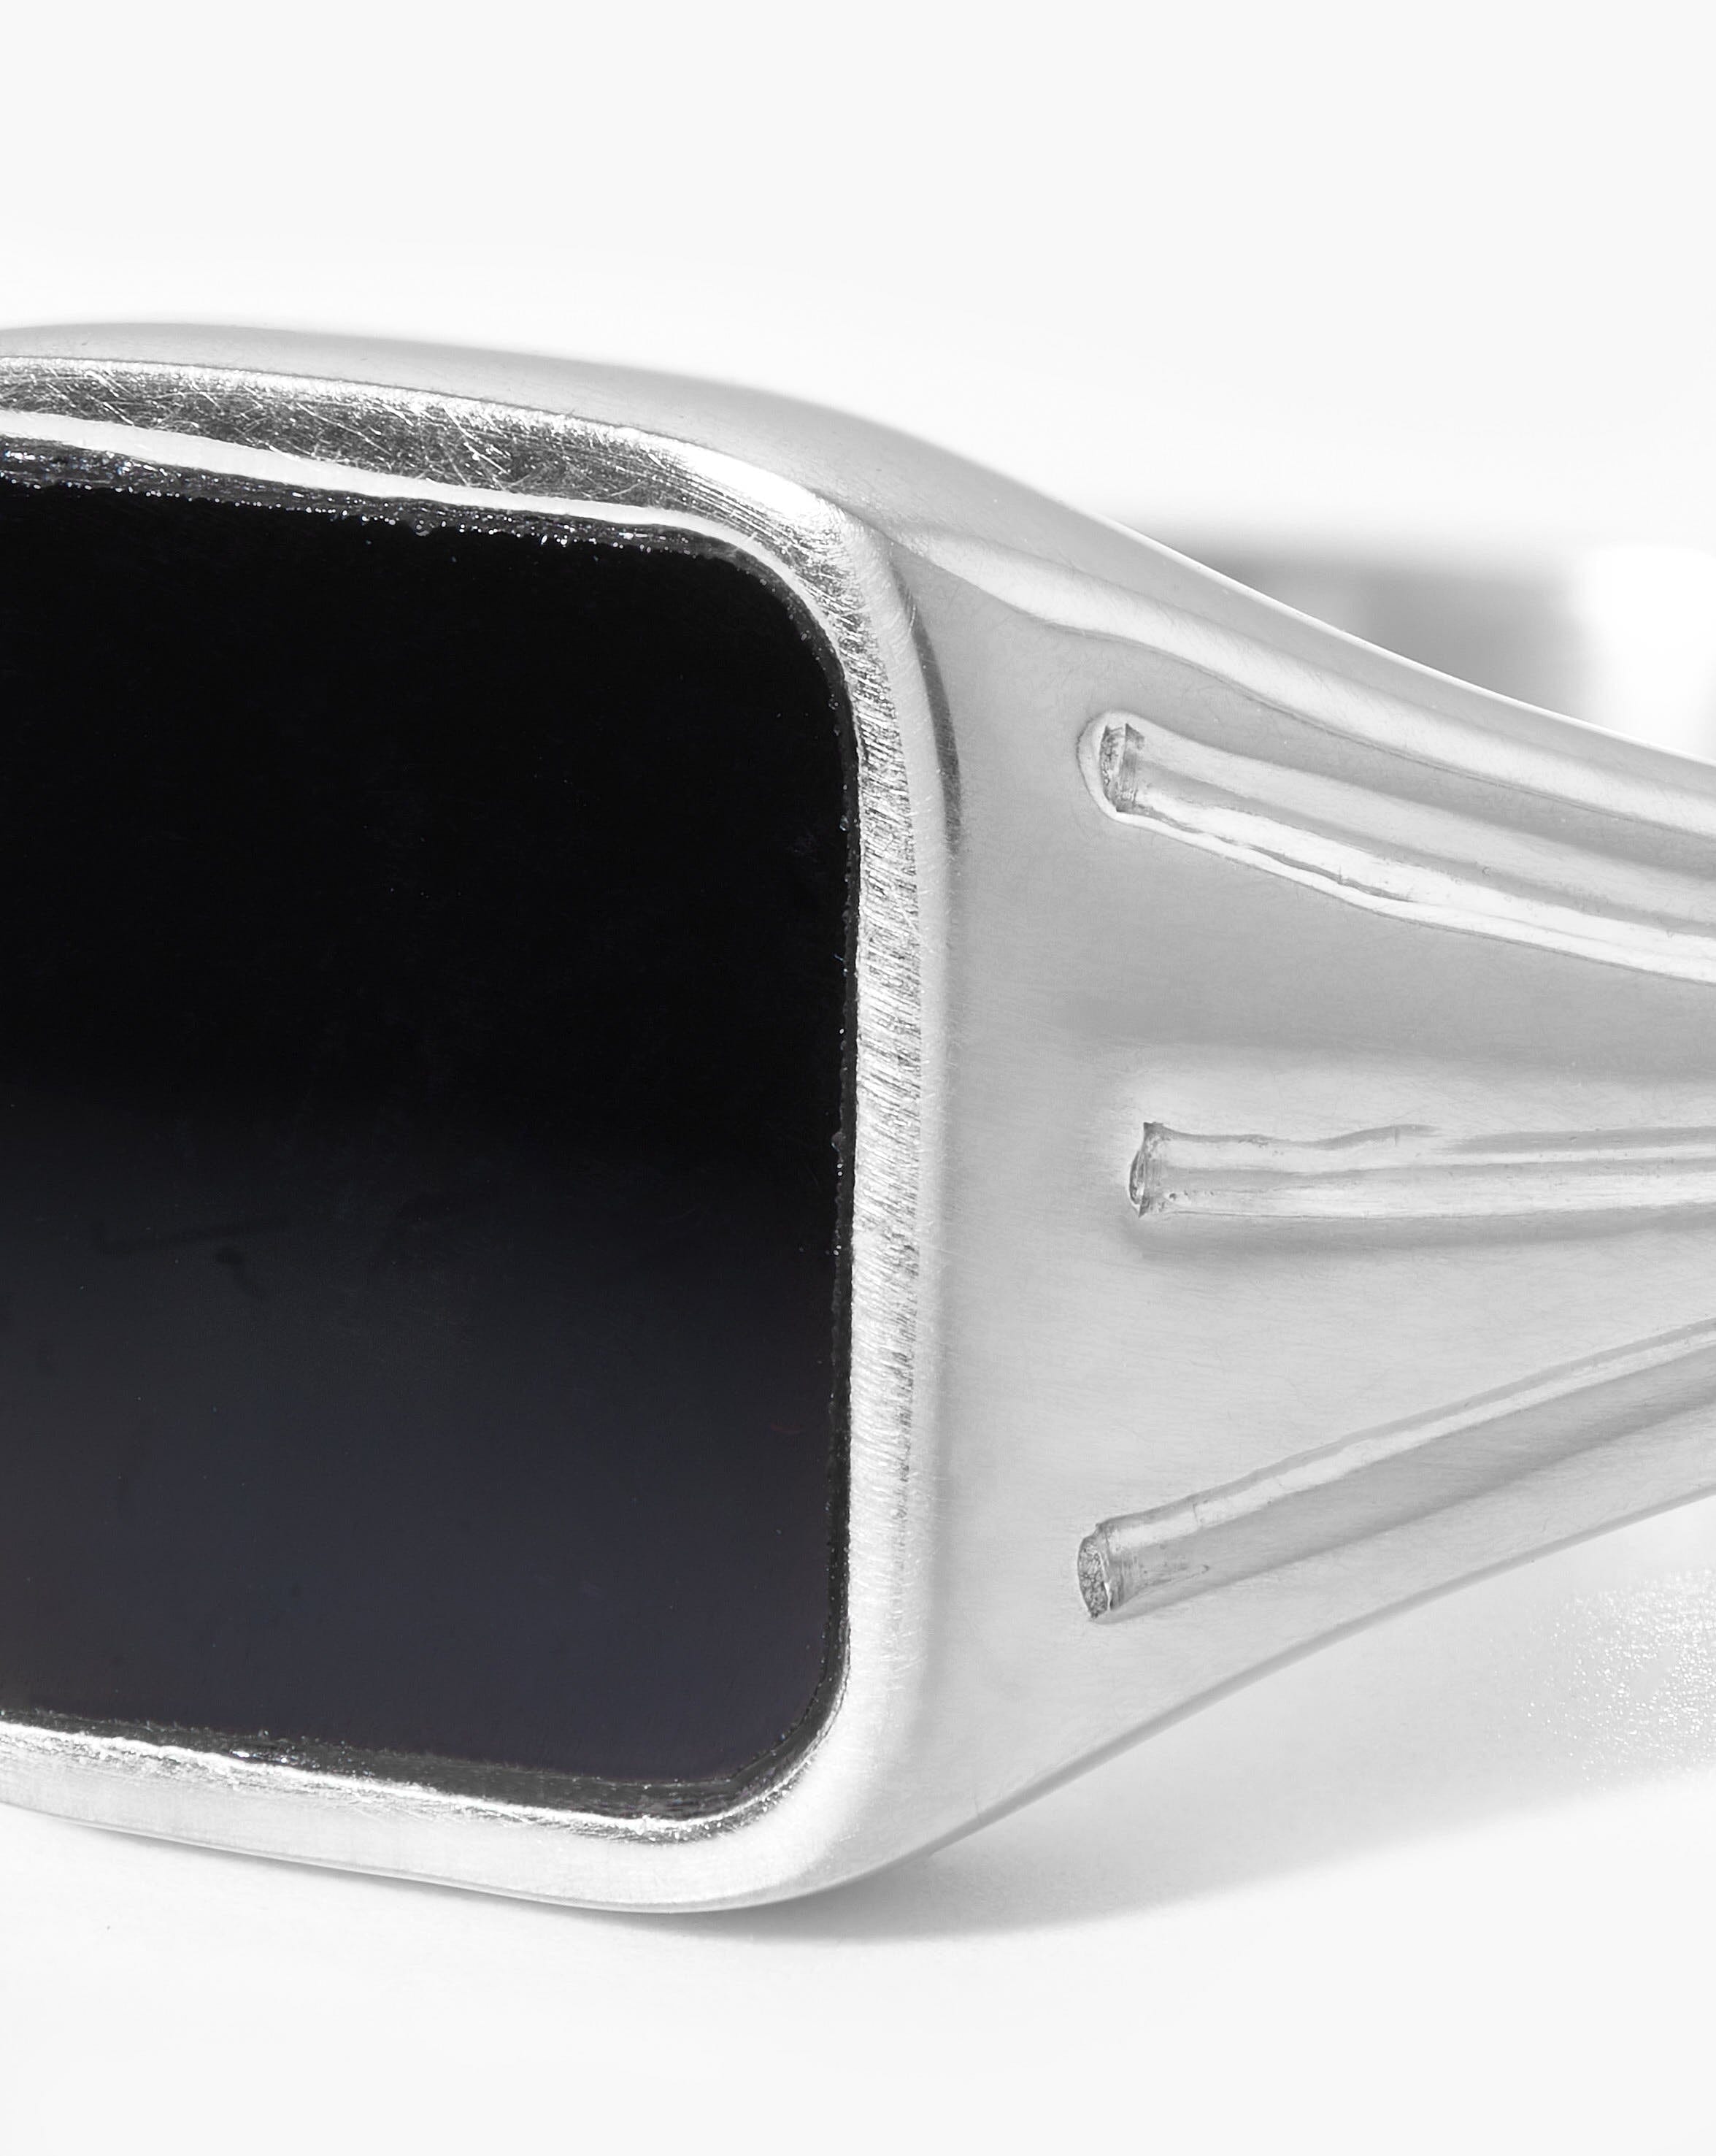 Lucy Williams Square Signet Ring | Sterling Silver/Black Spinel Rings Missoma 